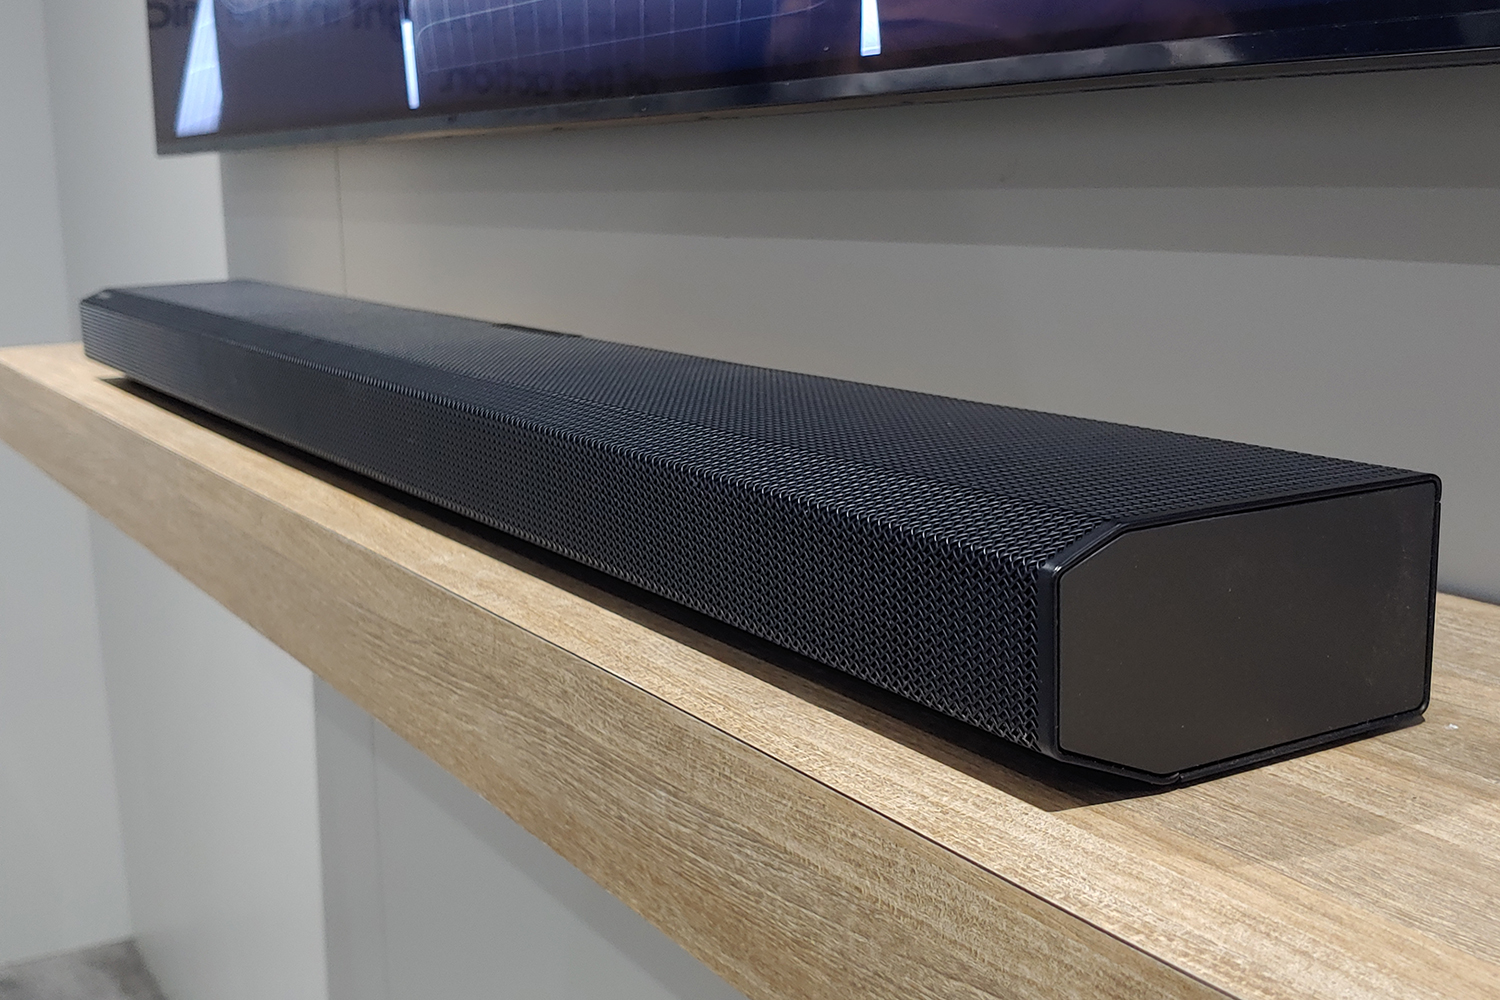 Samsung's Soundbar Pairs with QLED Speakers for Sound | Digital Trends